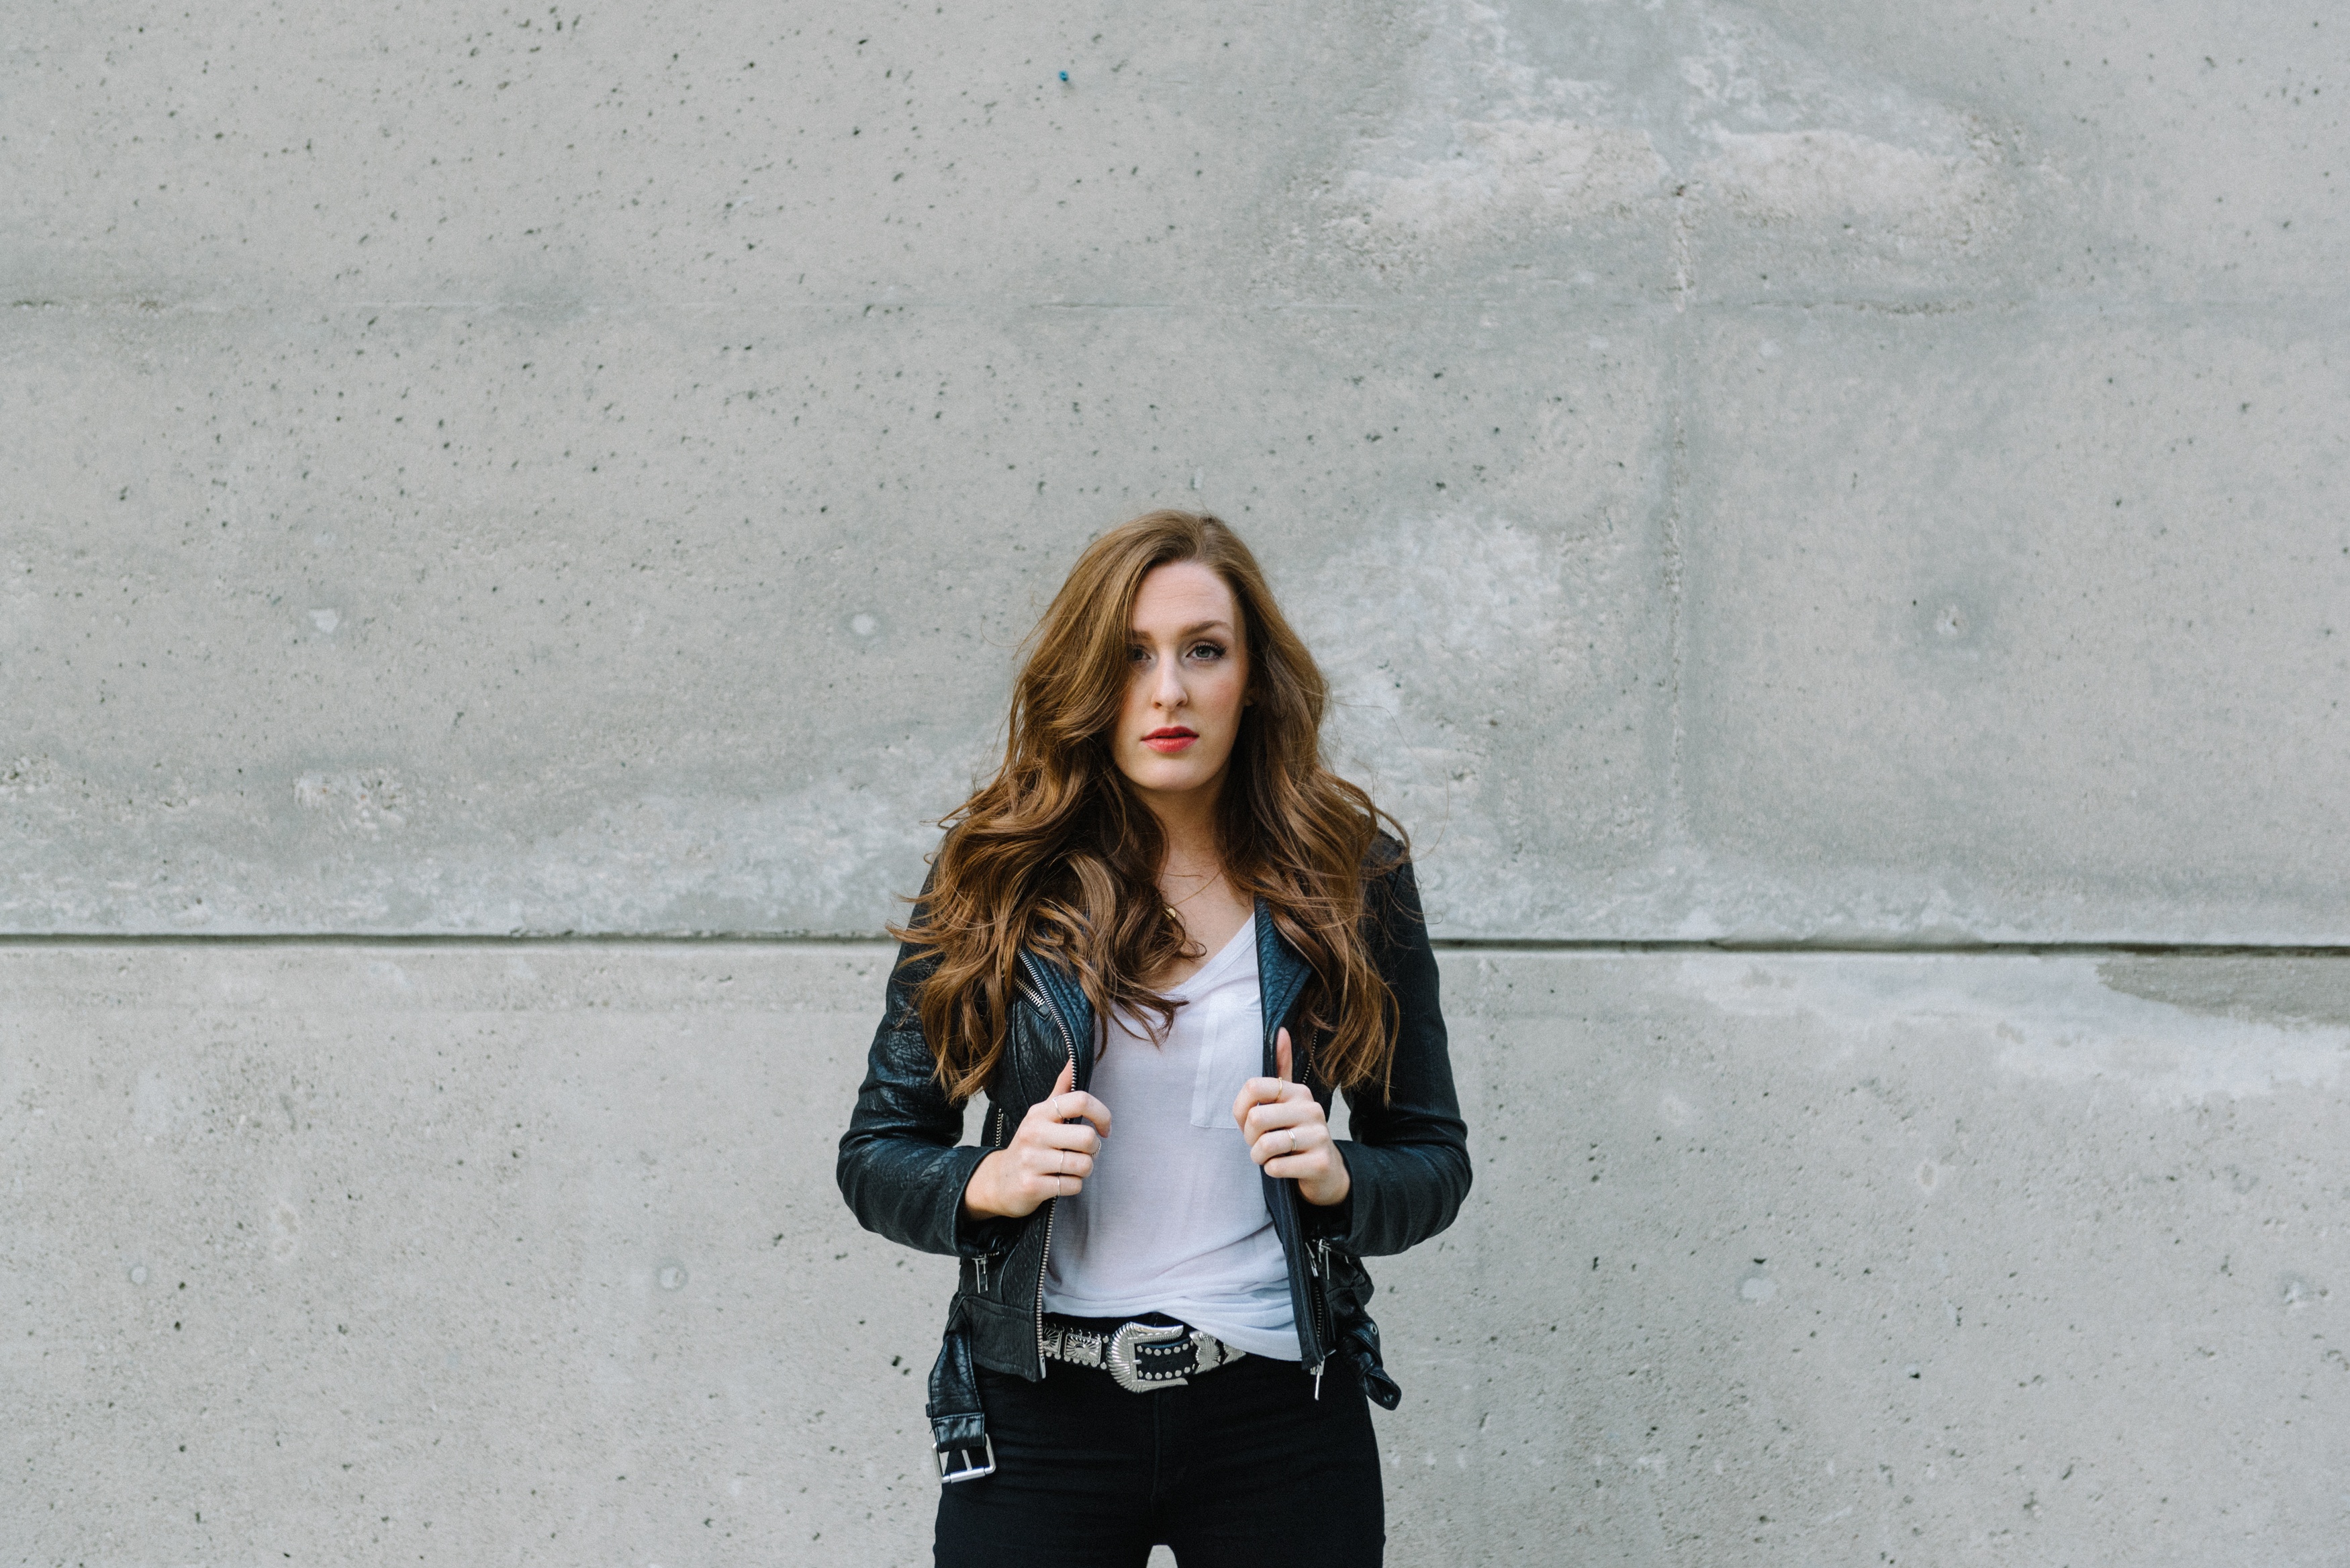 EMERGING - Canadian country singer Amanda Sadler continues to introduce her exceptional tunes to audiences across the country. She is currently on a radio tour